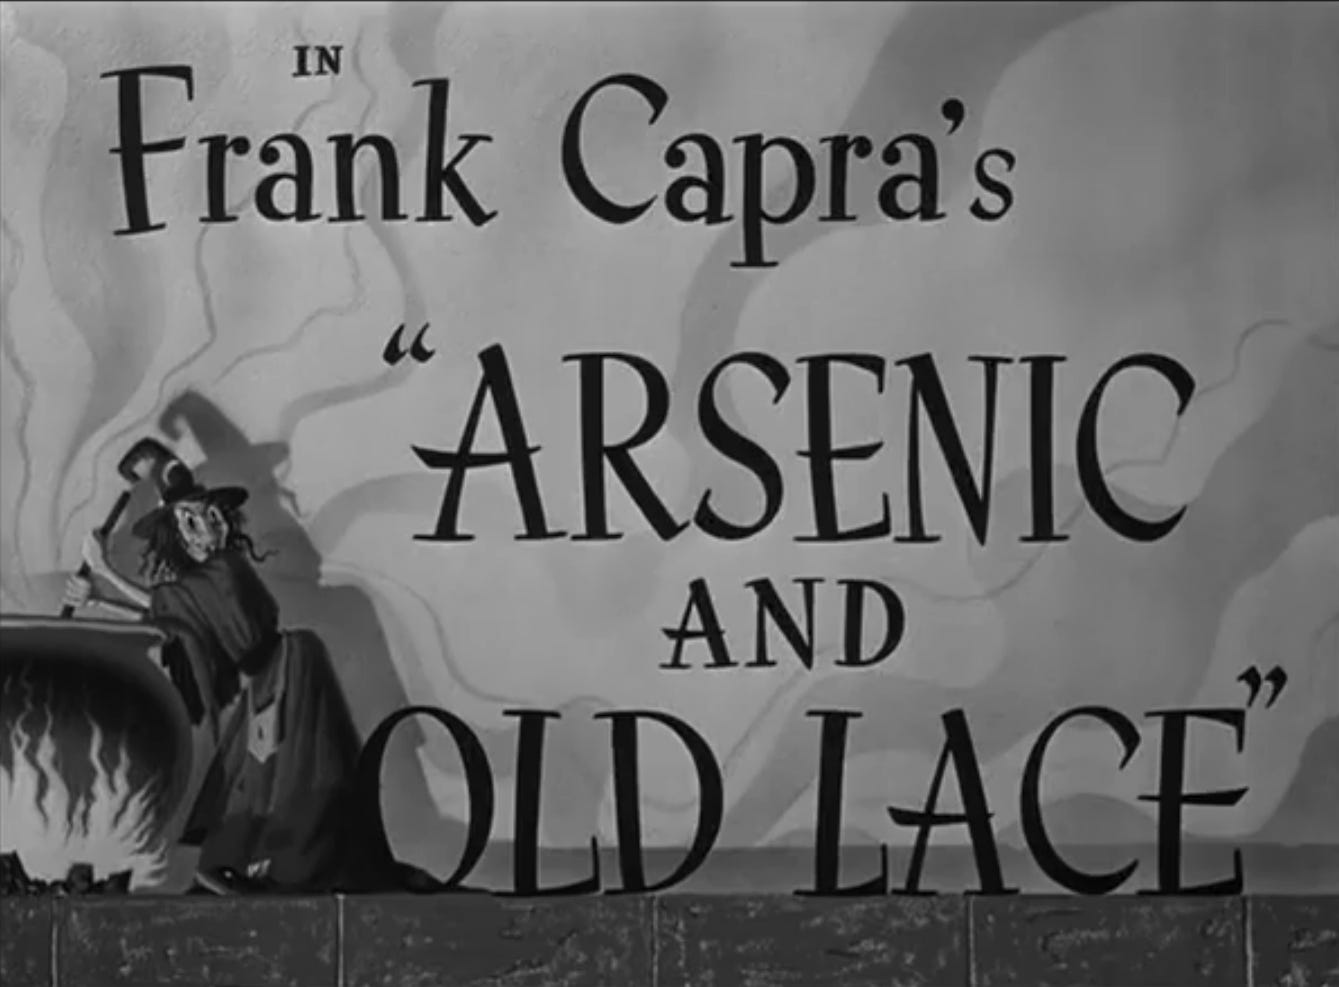 Arsenic and old lace (1944) title screen